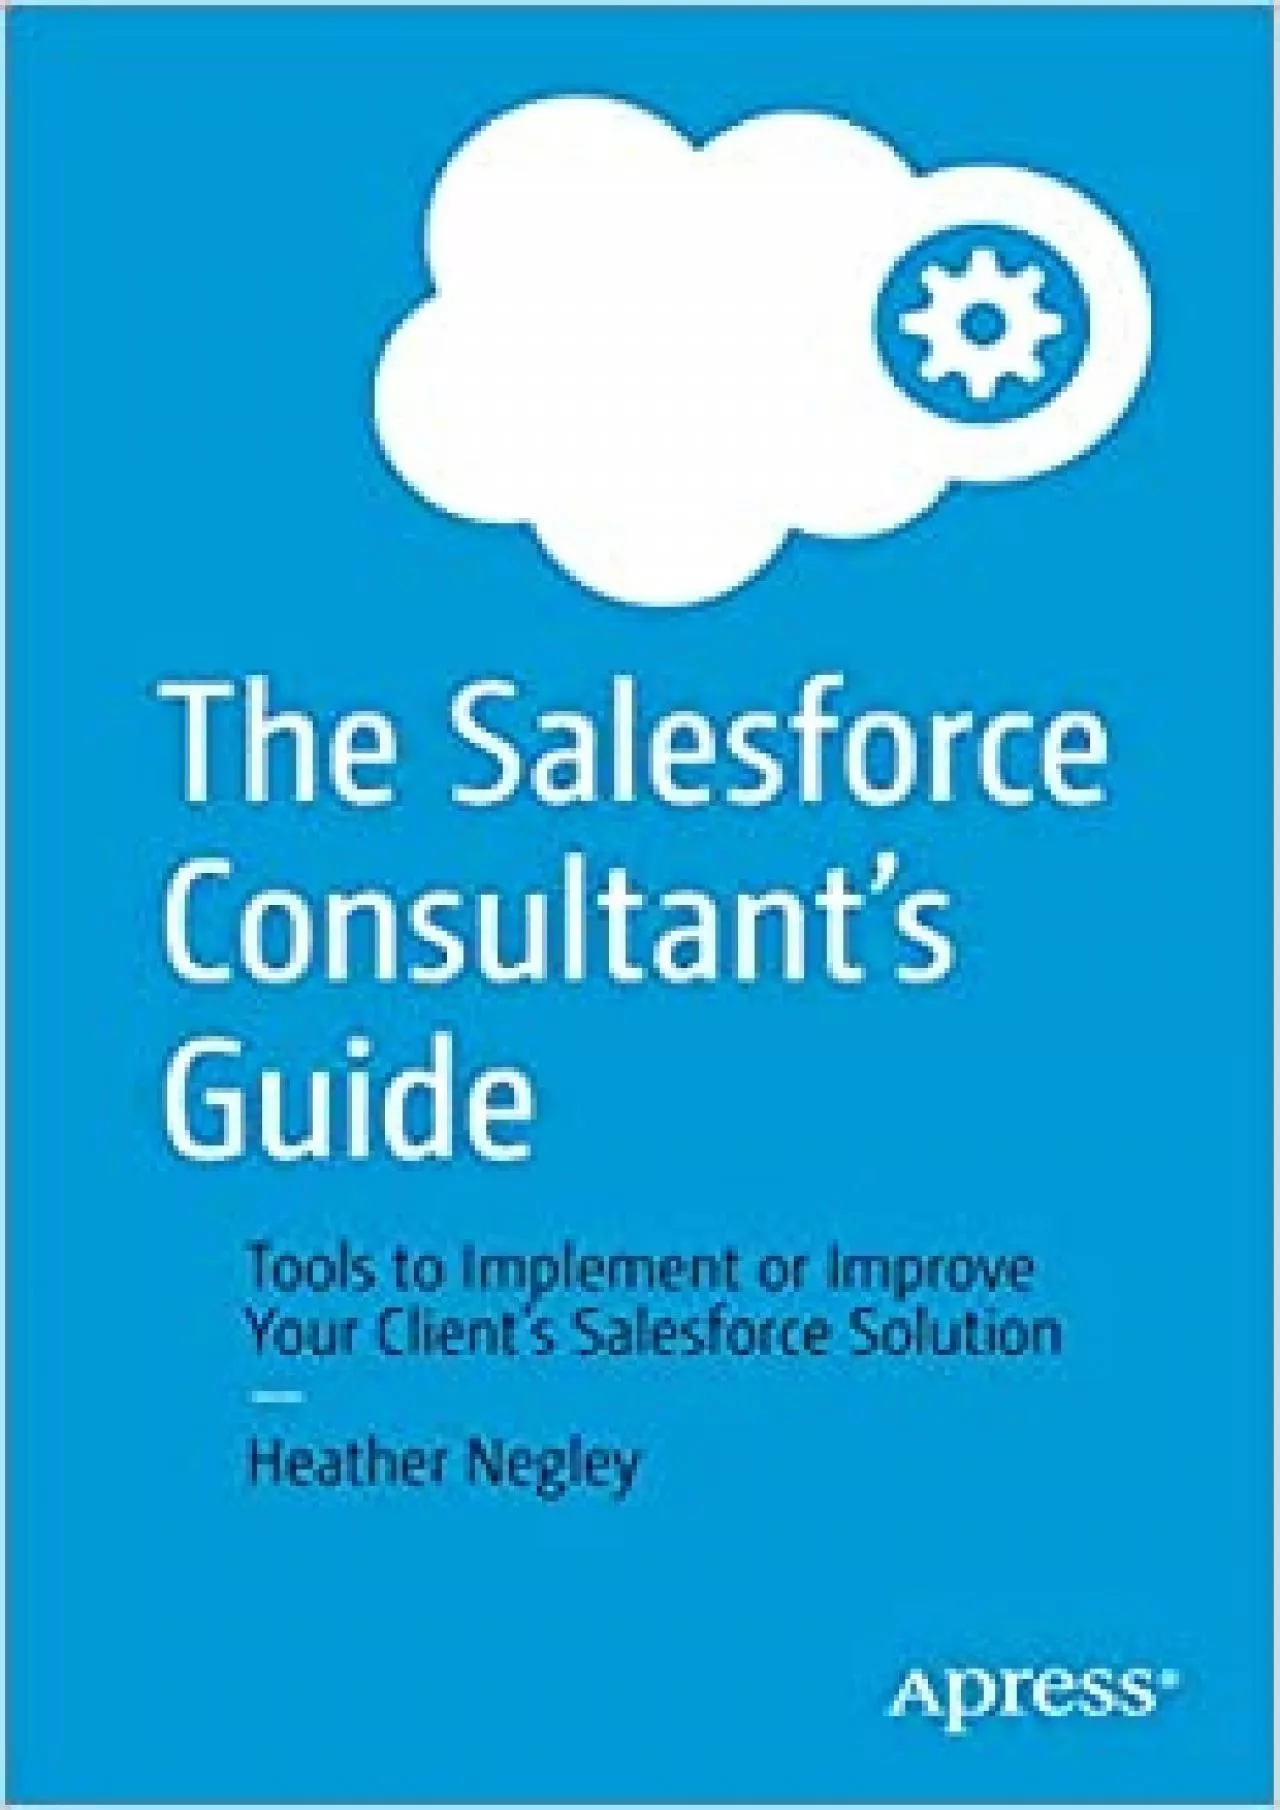 The Salesforce Consultant’s Guide: Tools to Implement or Improve Your Client’s Salesforce